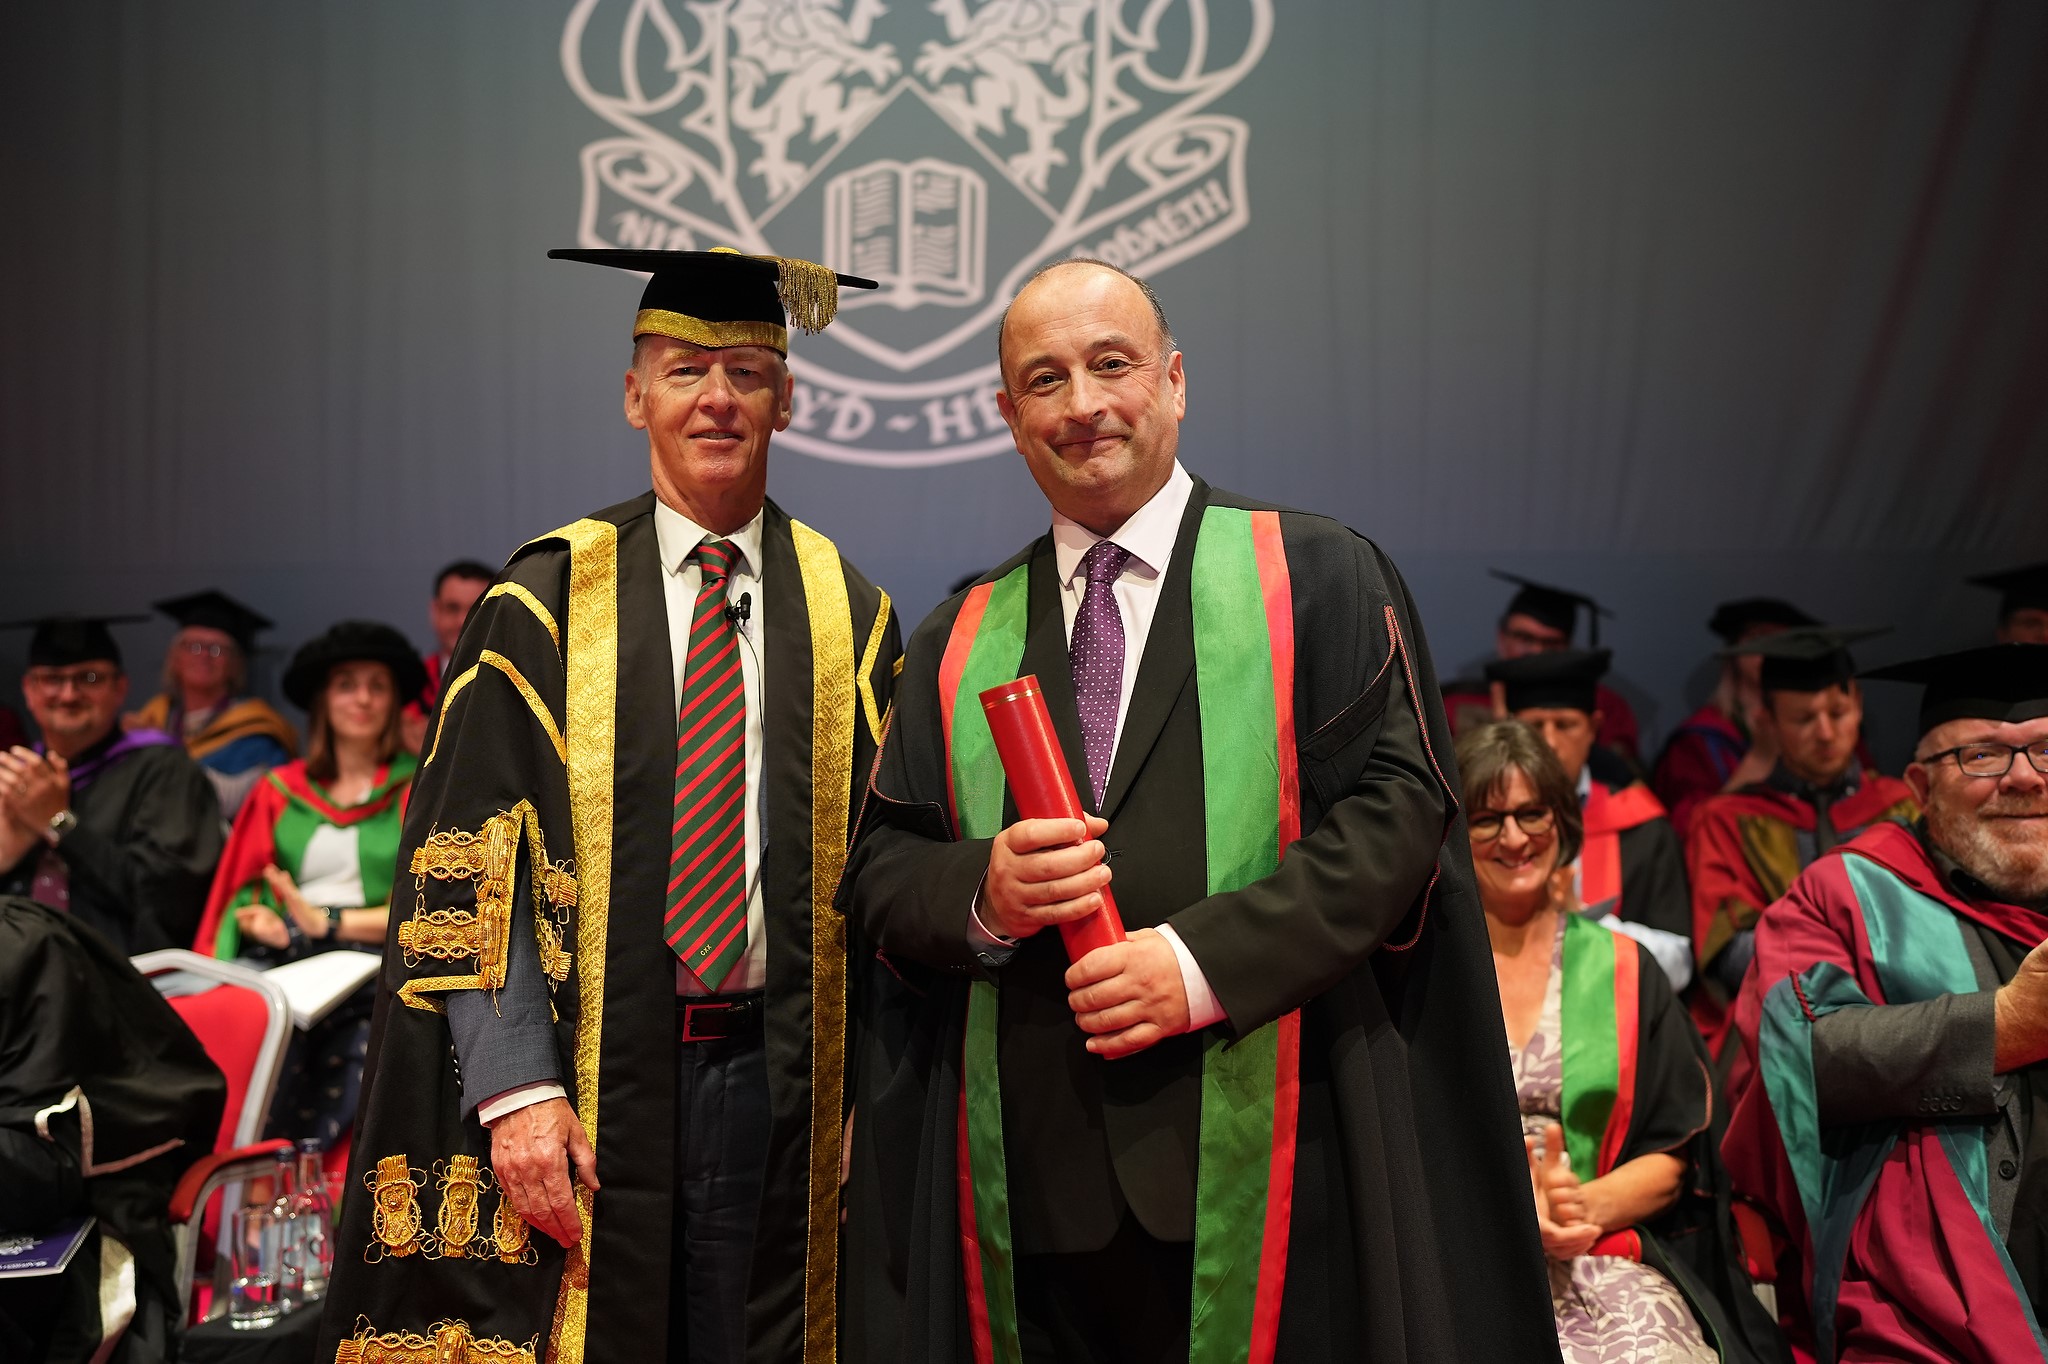 Dr Emyr Roberts, Chair of Aberystwyth University Council, presenting an Honorary Fellowship to Phil Thomas